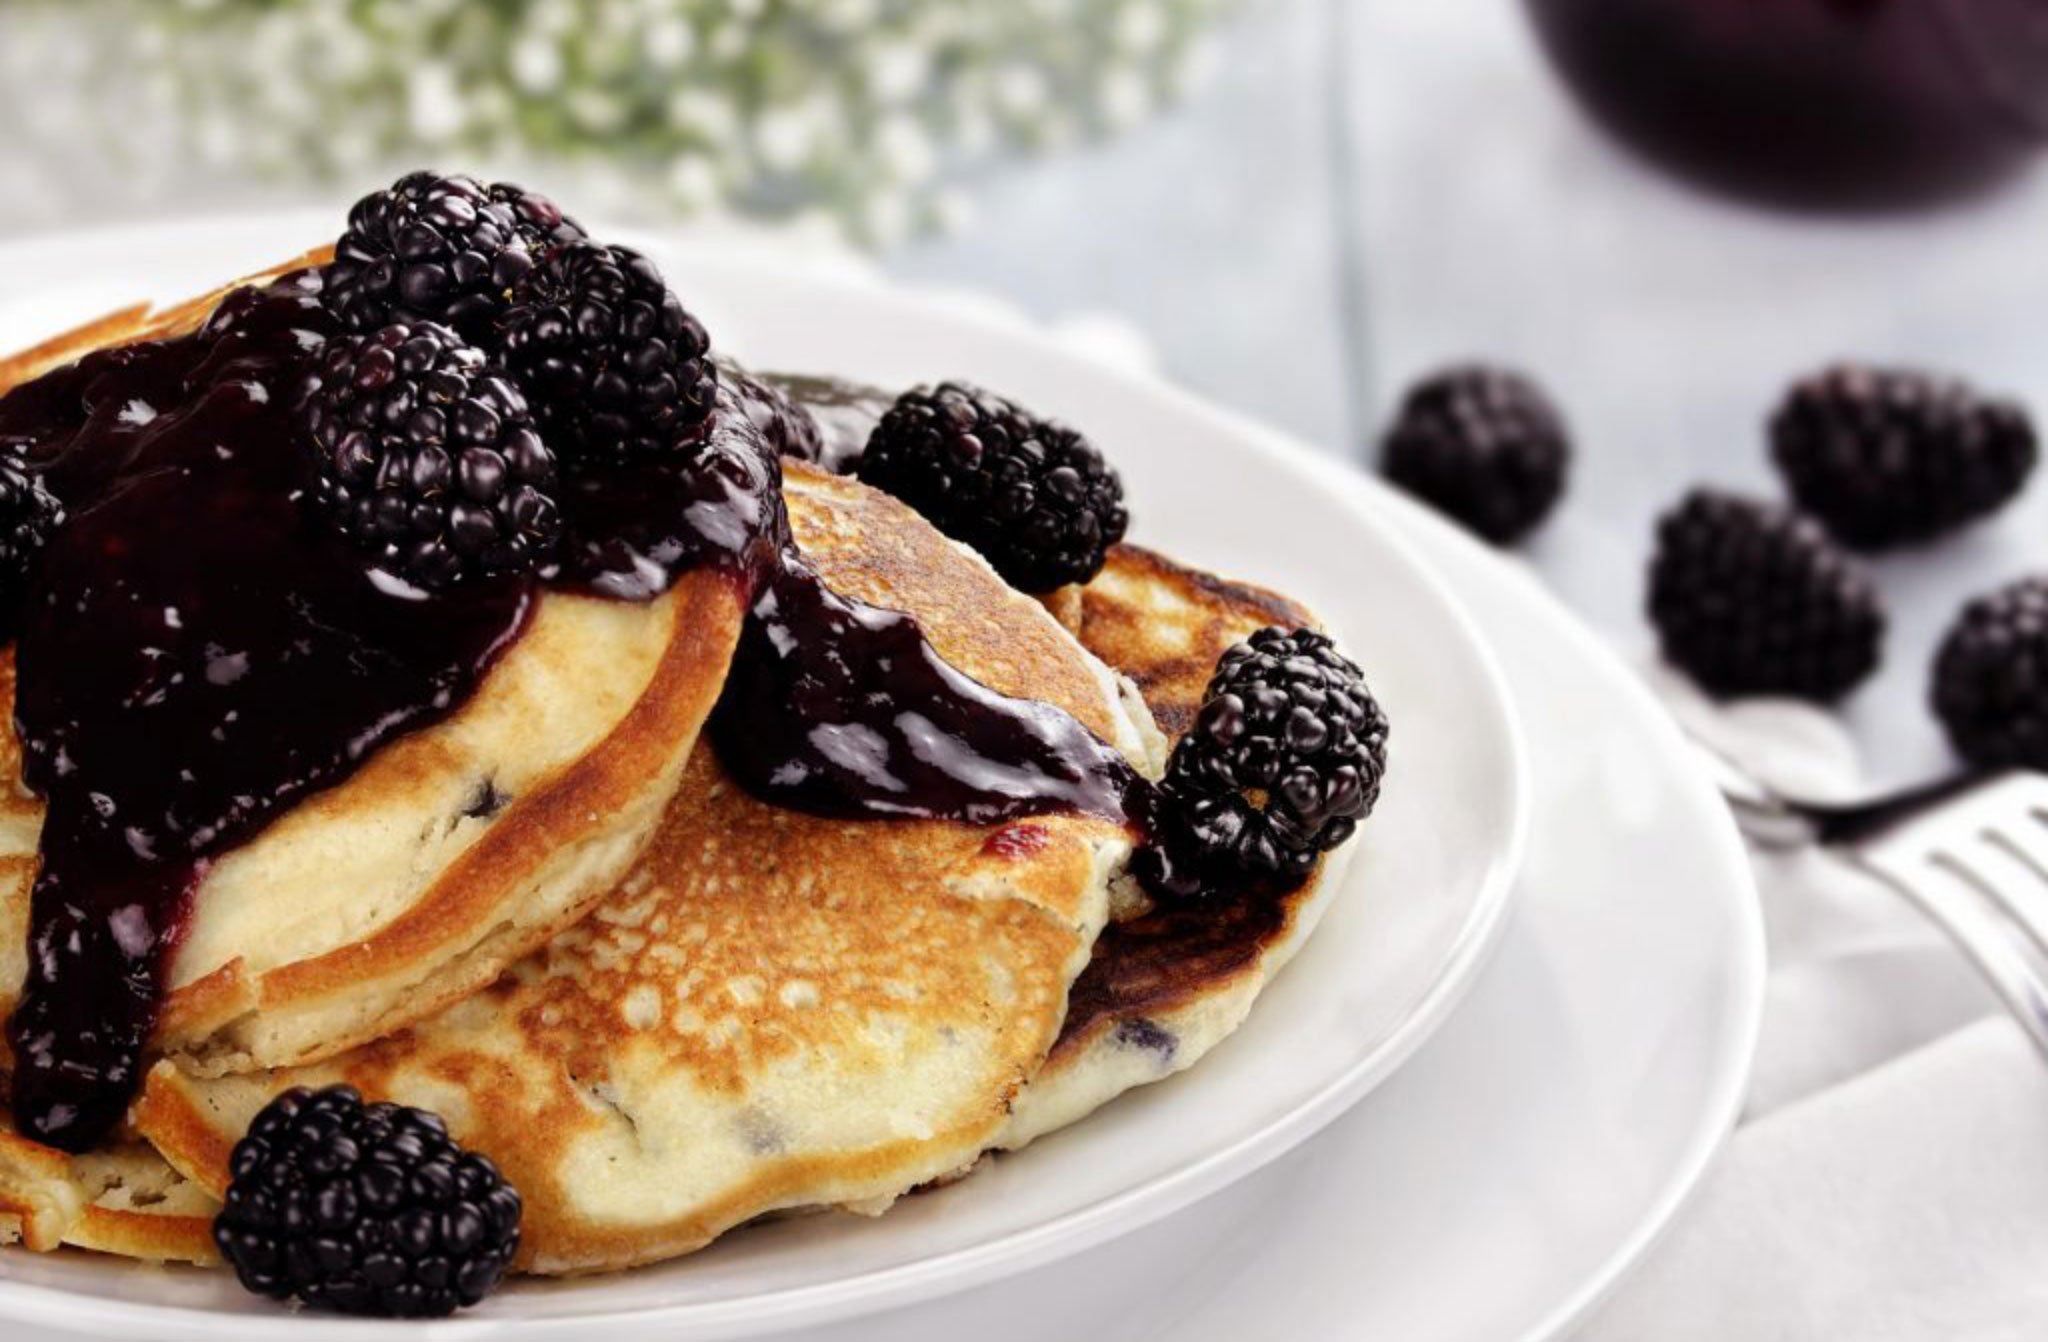 Don't miss out on these classic American pancakes that the whole family will love